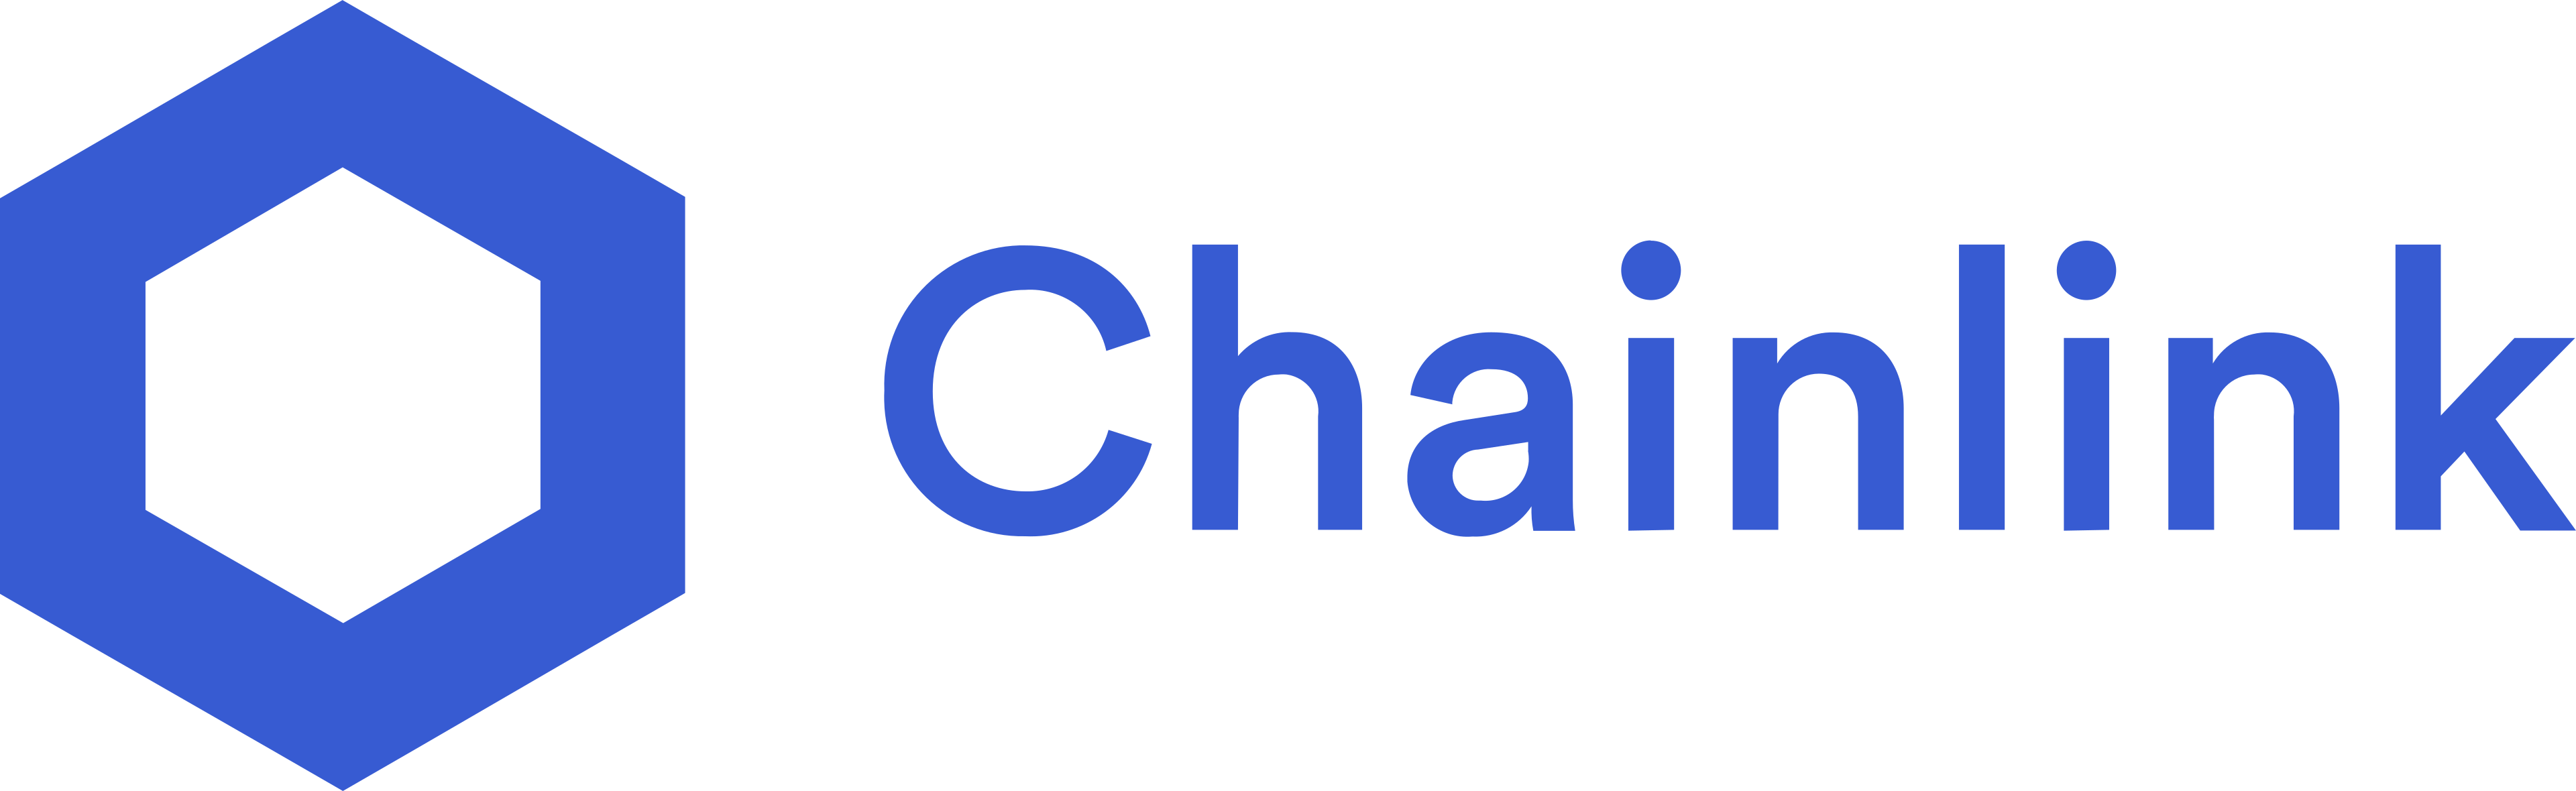 Setup Your Own Chainlink Node in 15 Minutes